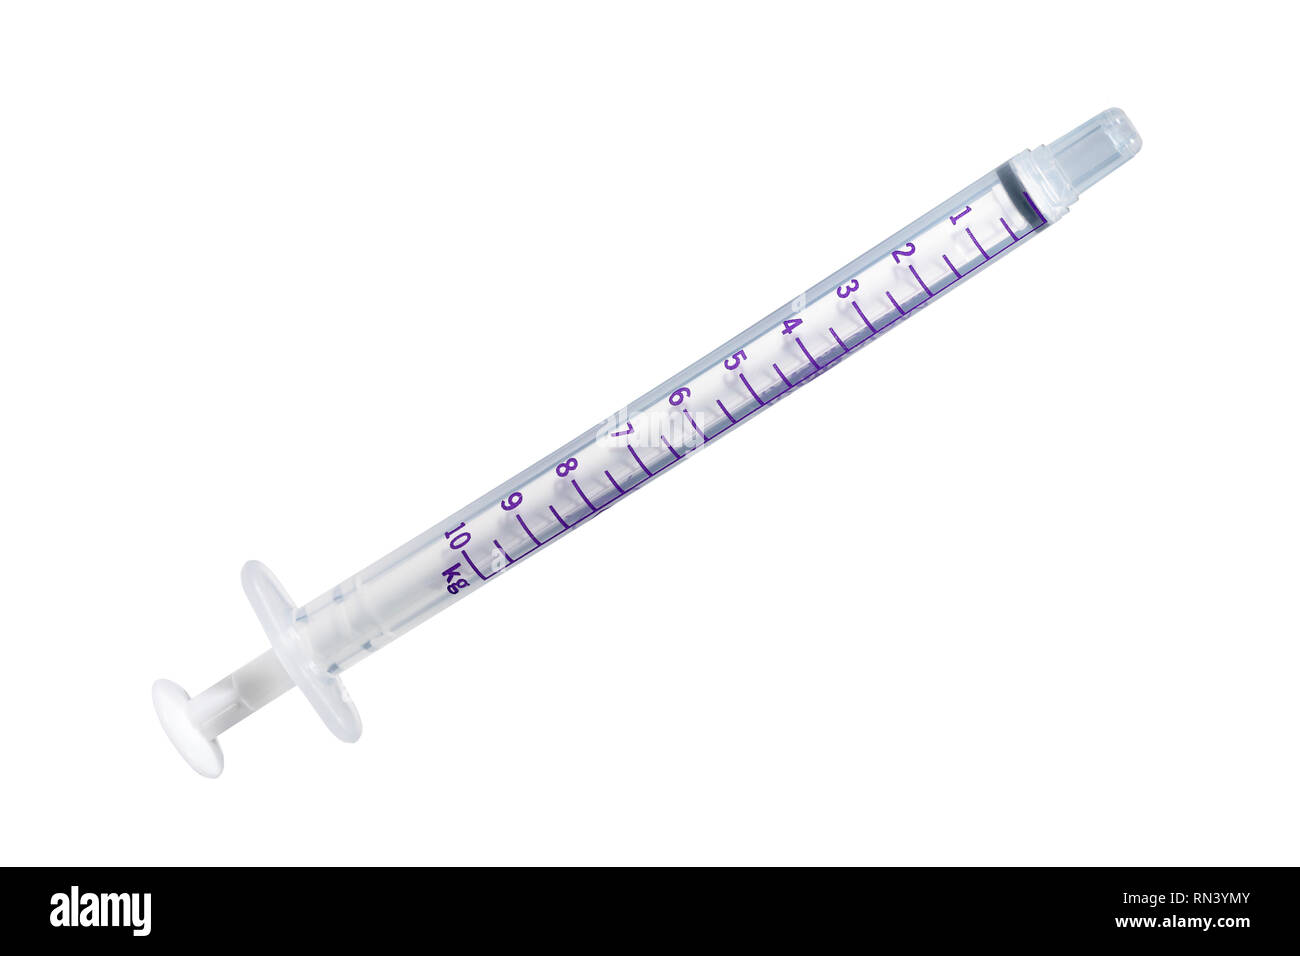 Syringe calibrated dose per kg body weight. Stock Photo